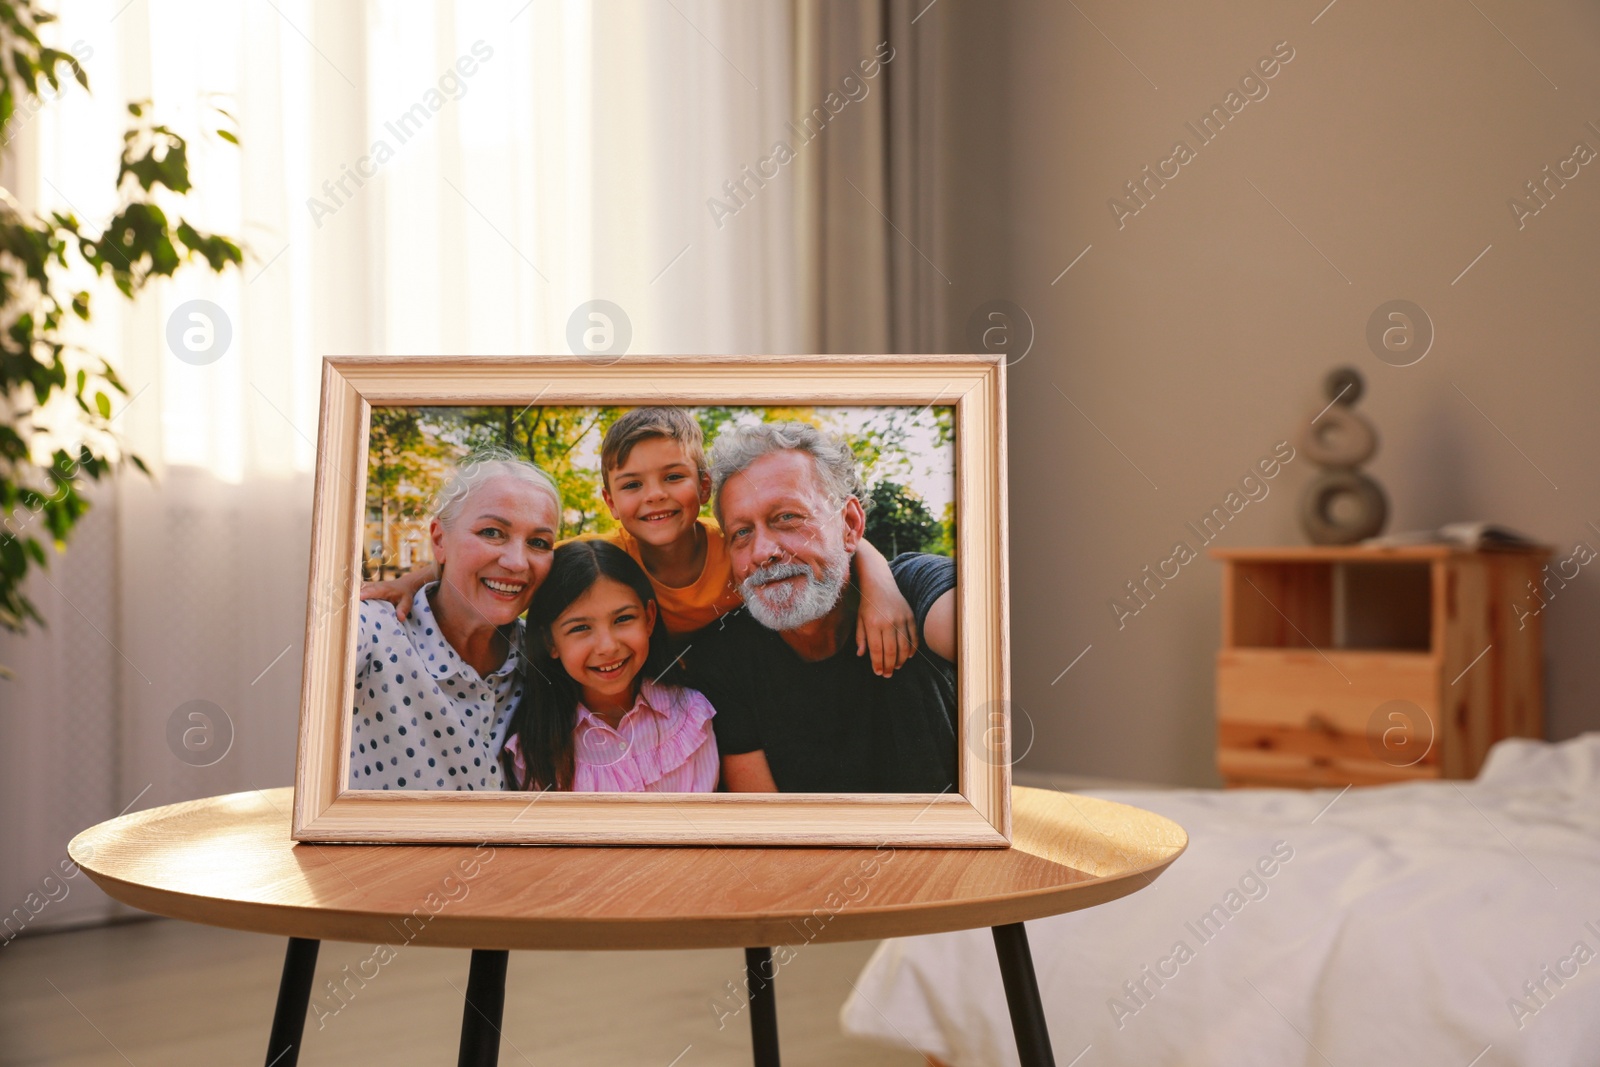 Photo of Framed family photo on wooden table in bedroom